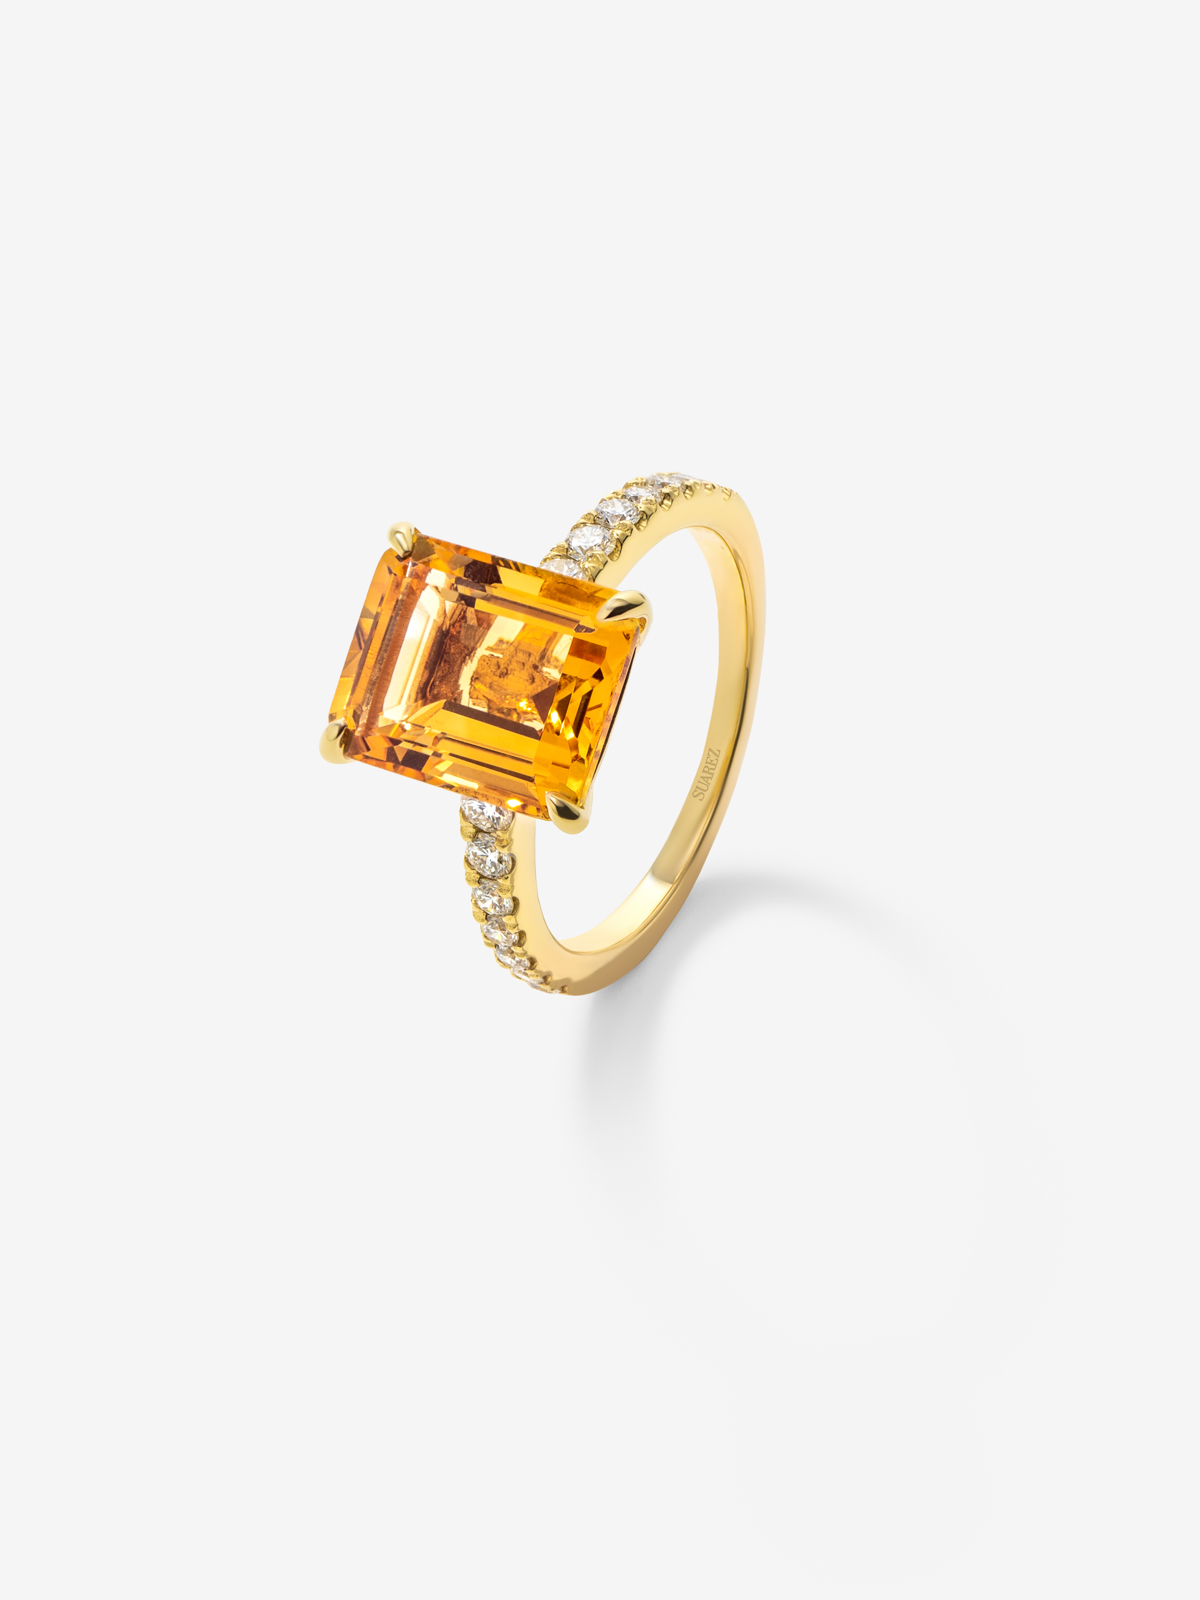 18K yellow gold ring with citrine quartz in emerald size 1.2 cts and white diamonds in bright size of 0.18 cts